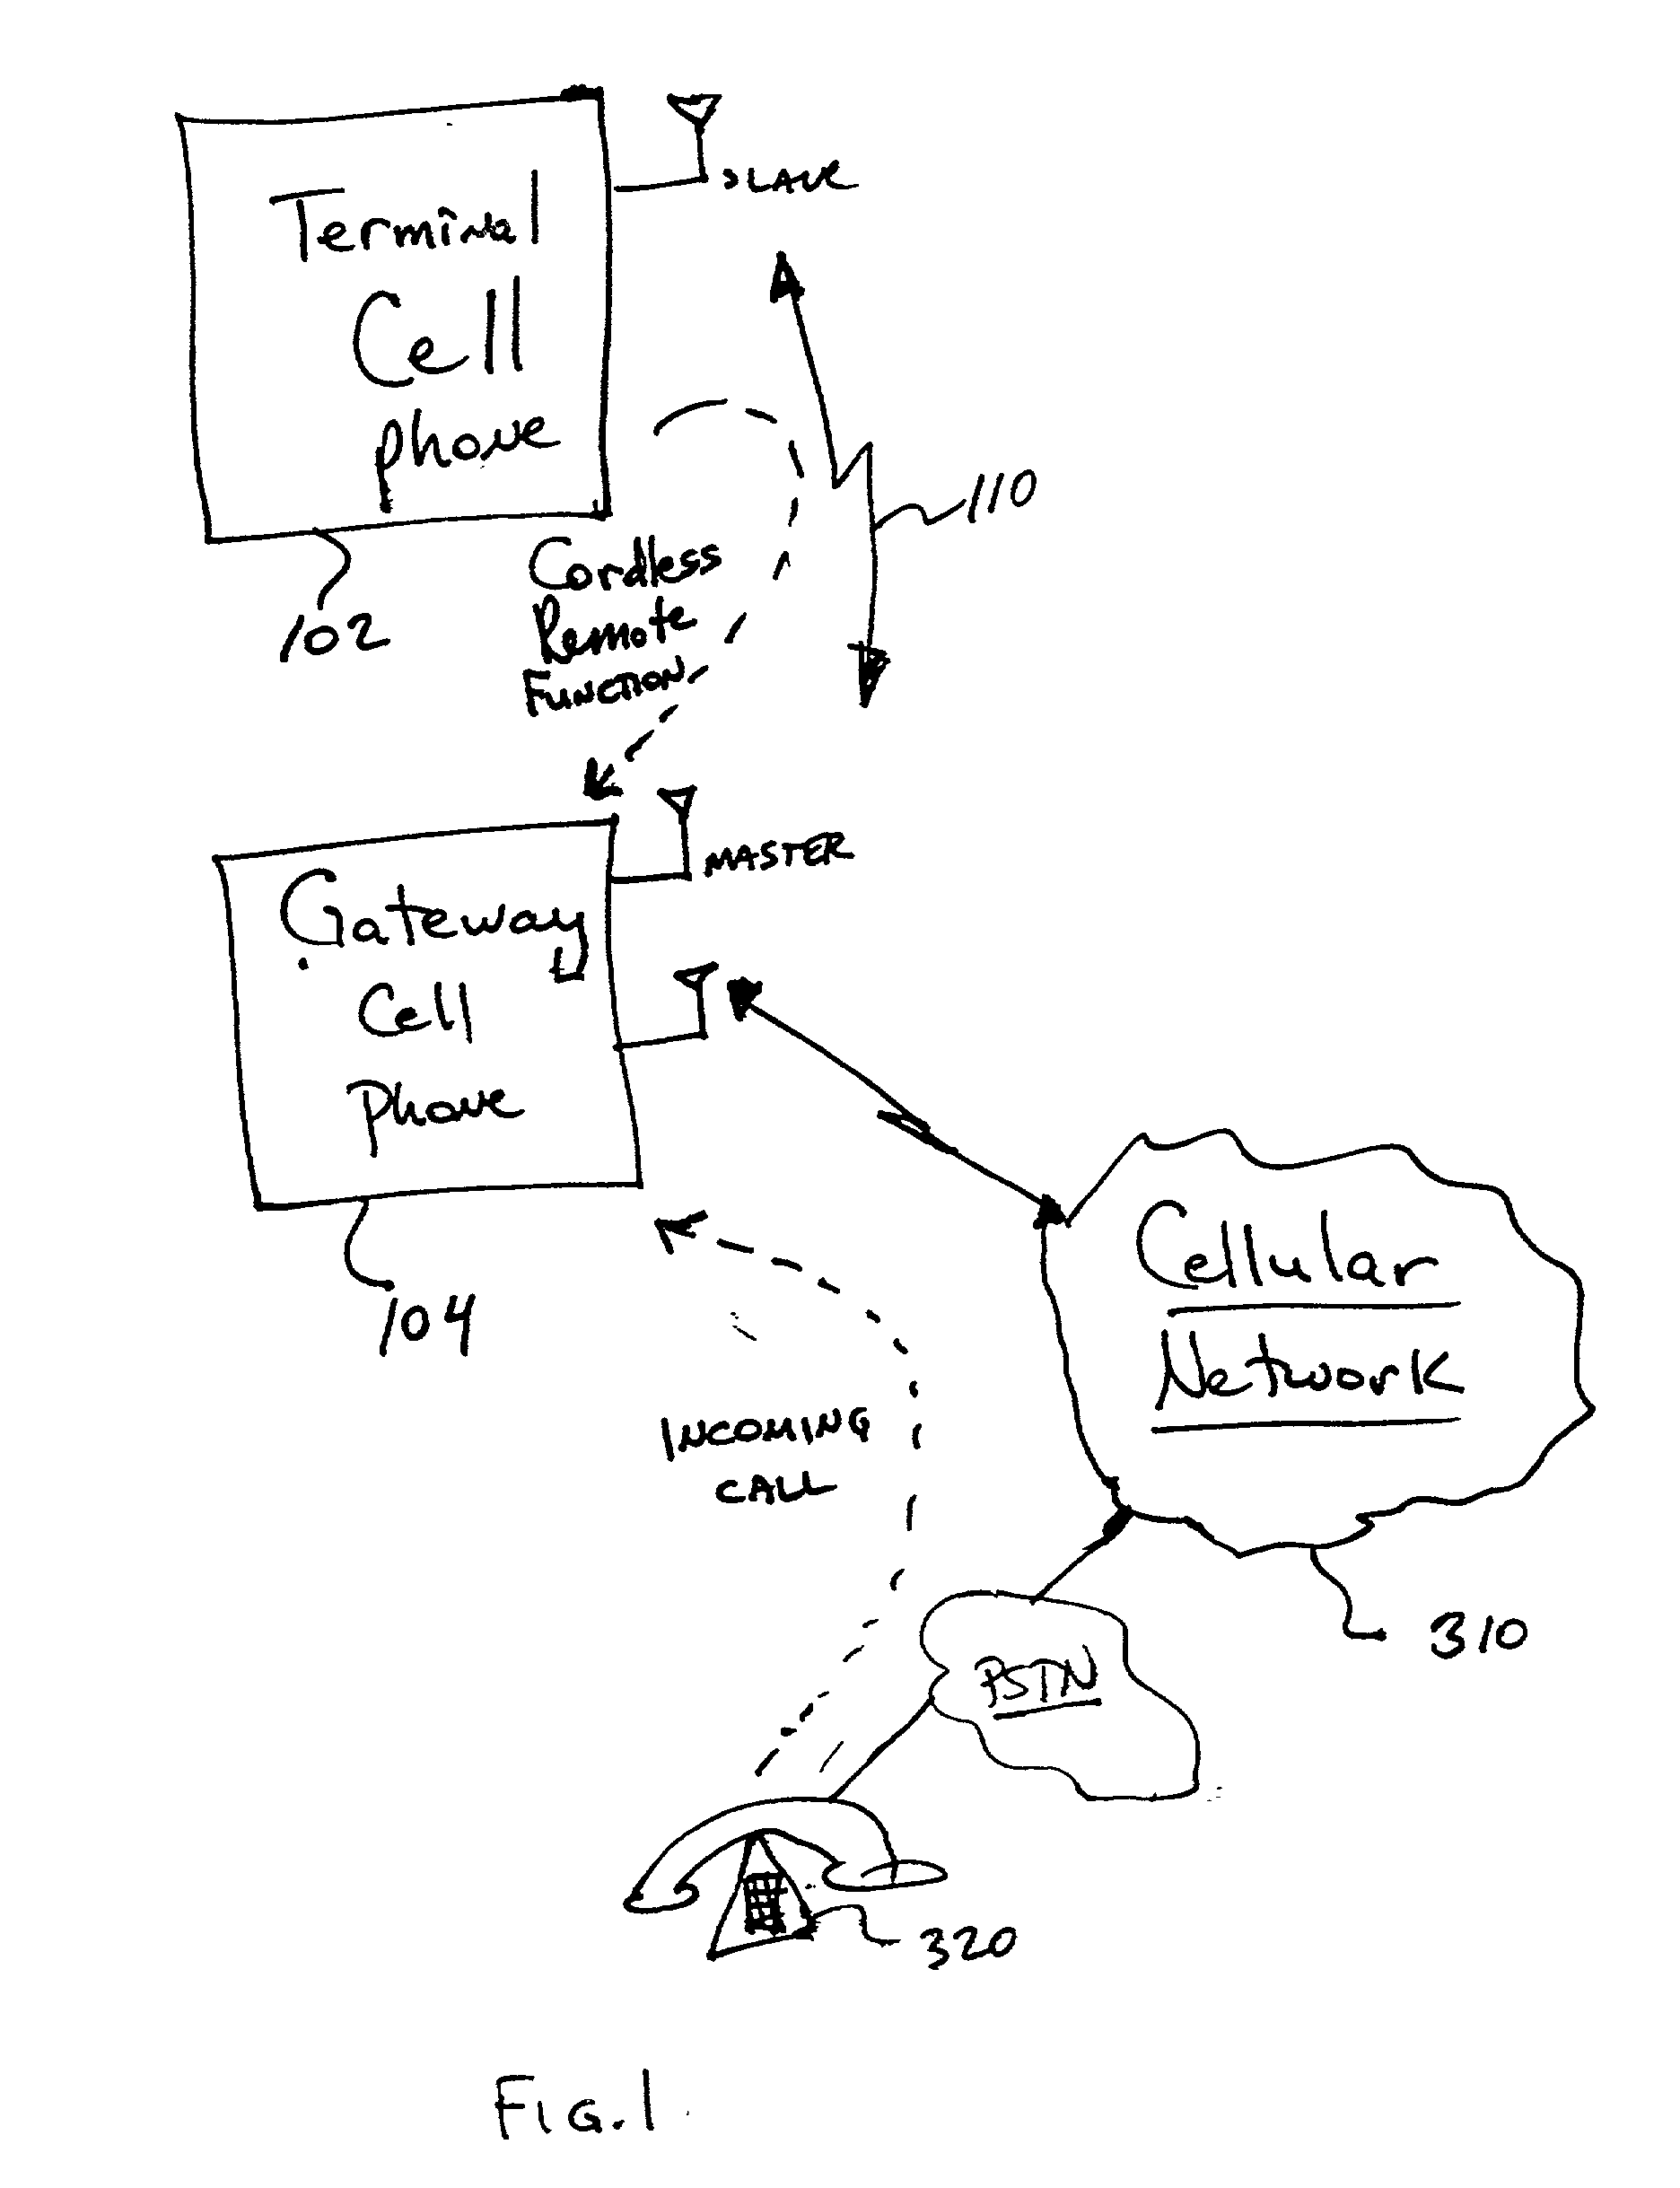 Cell phone extension using wireless piconet